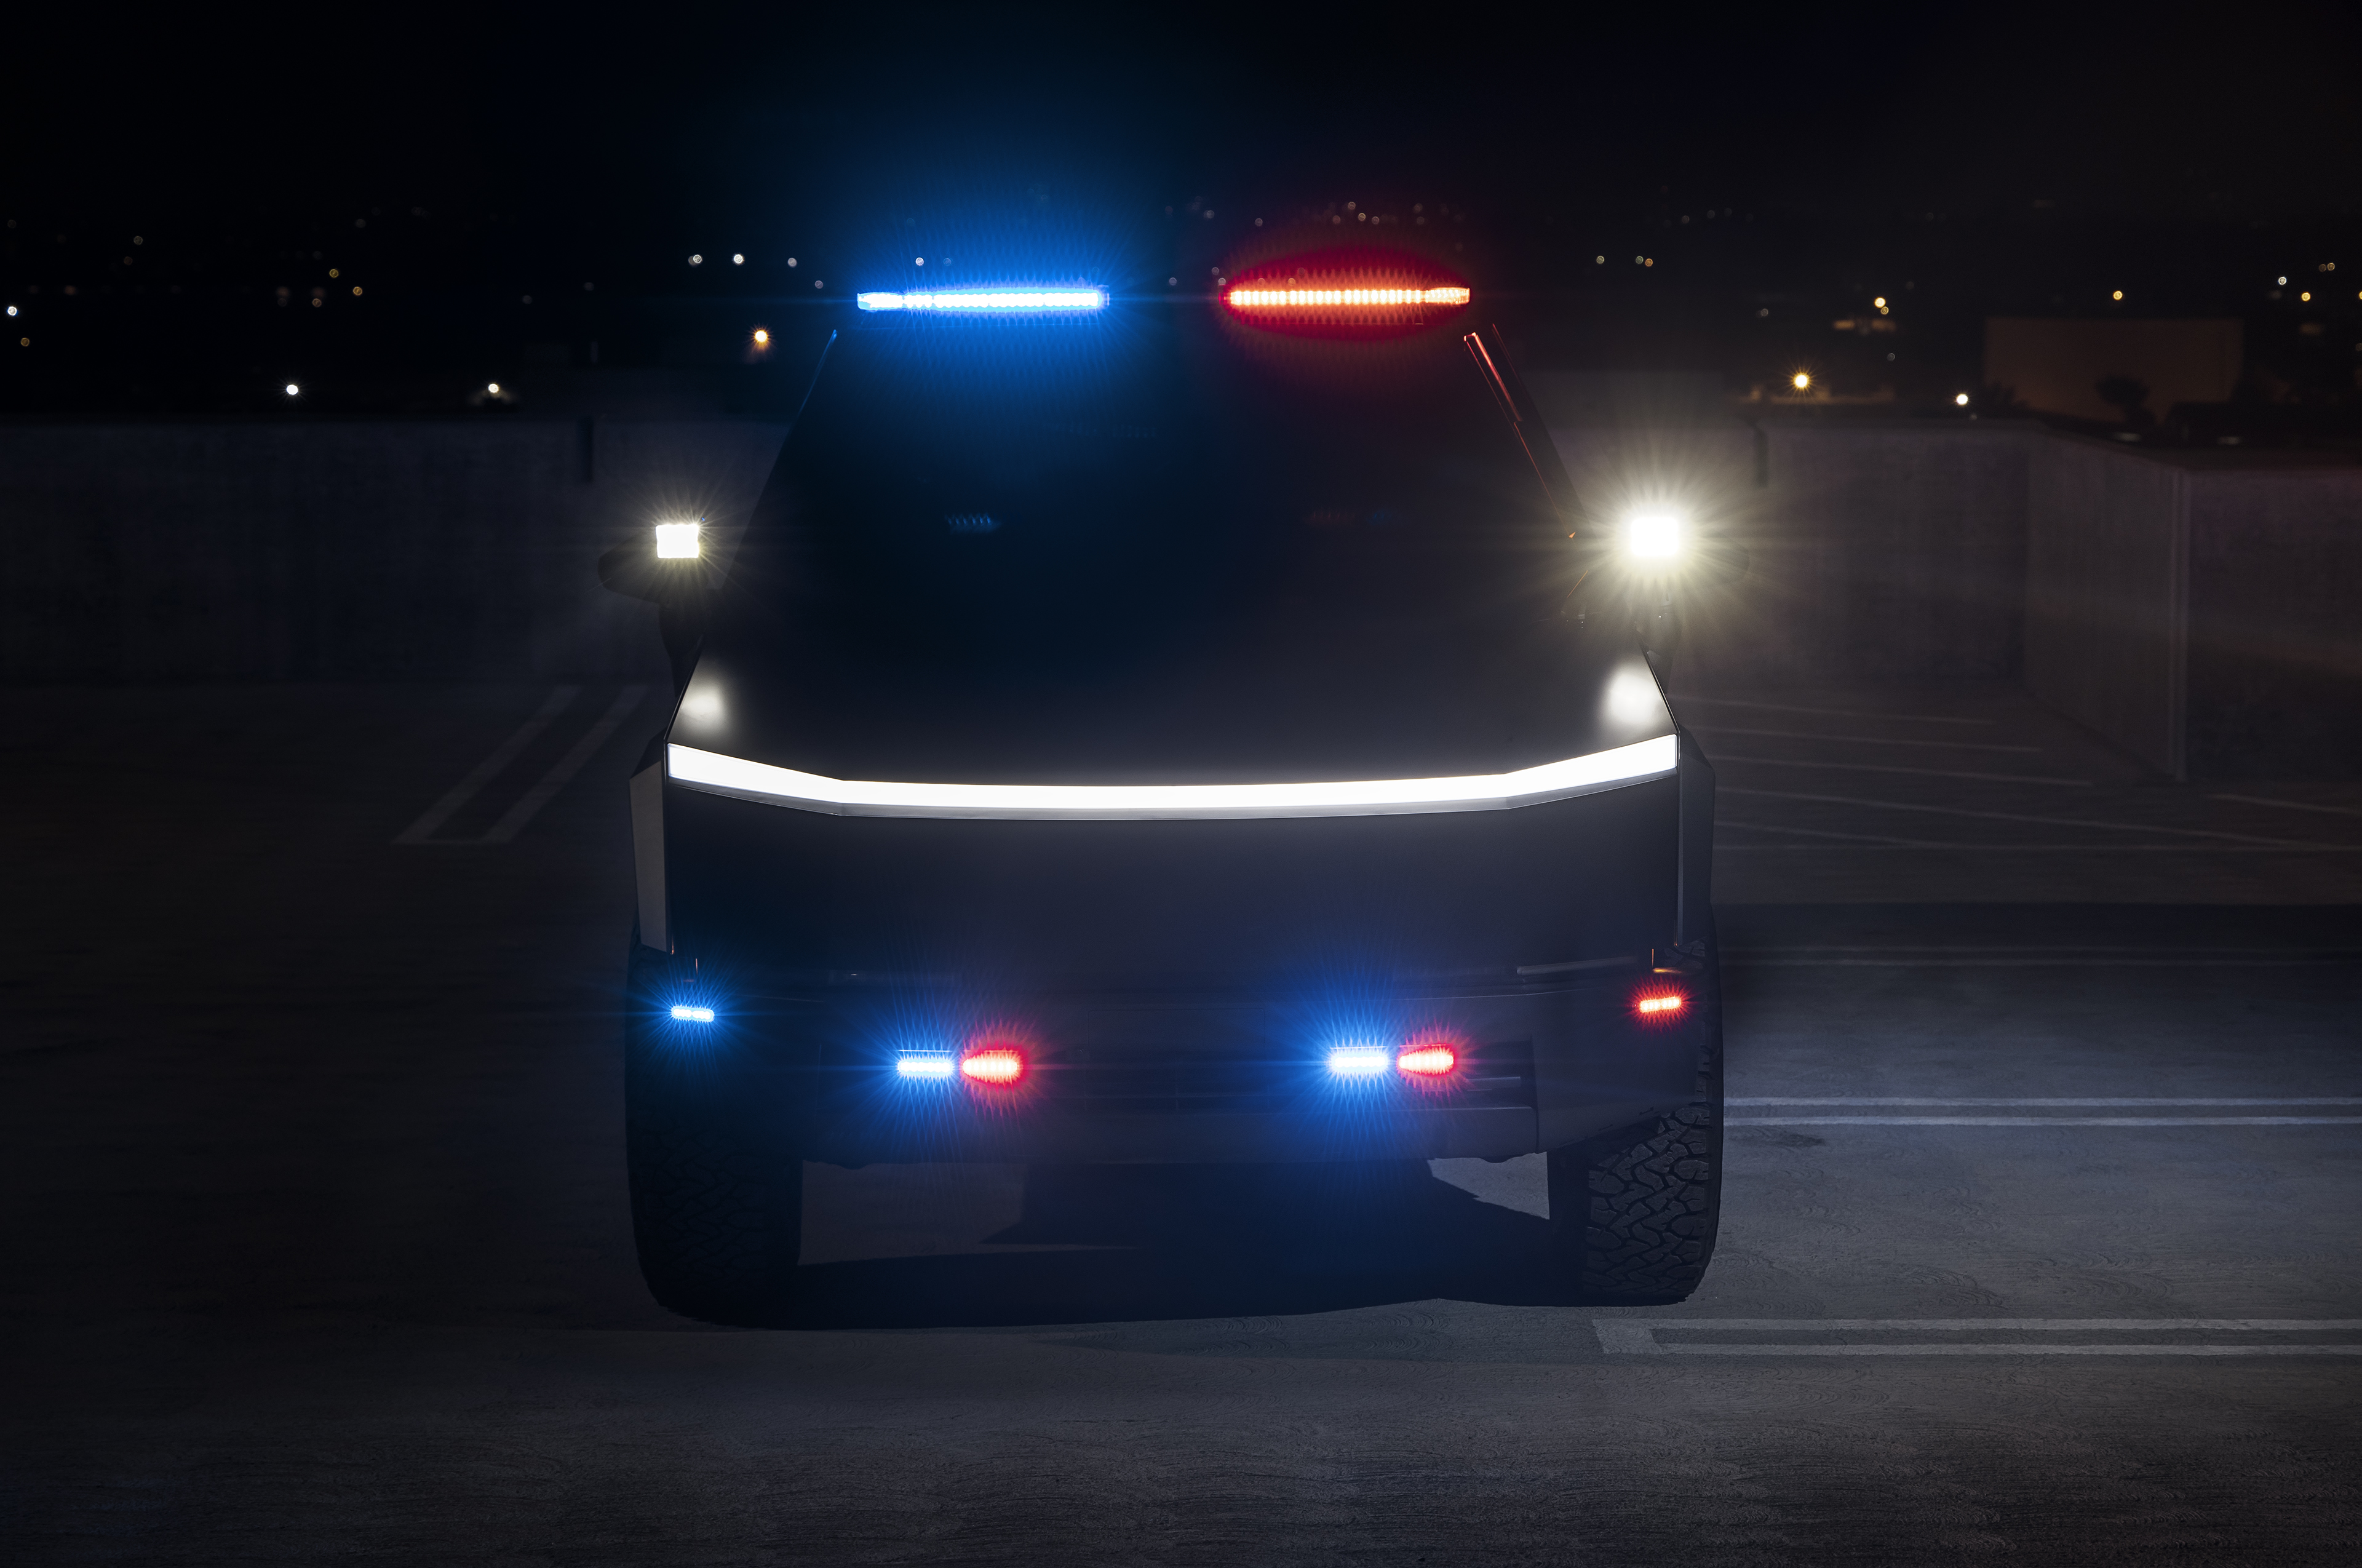 UP.FIT Unplugged Performance Tesla Cybertruck Police car Vehicle 1